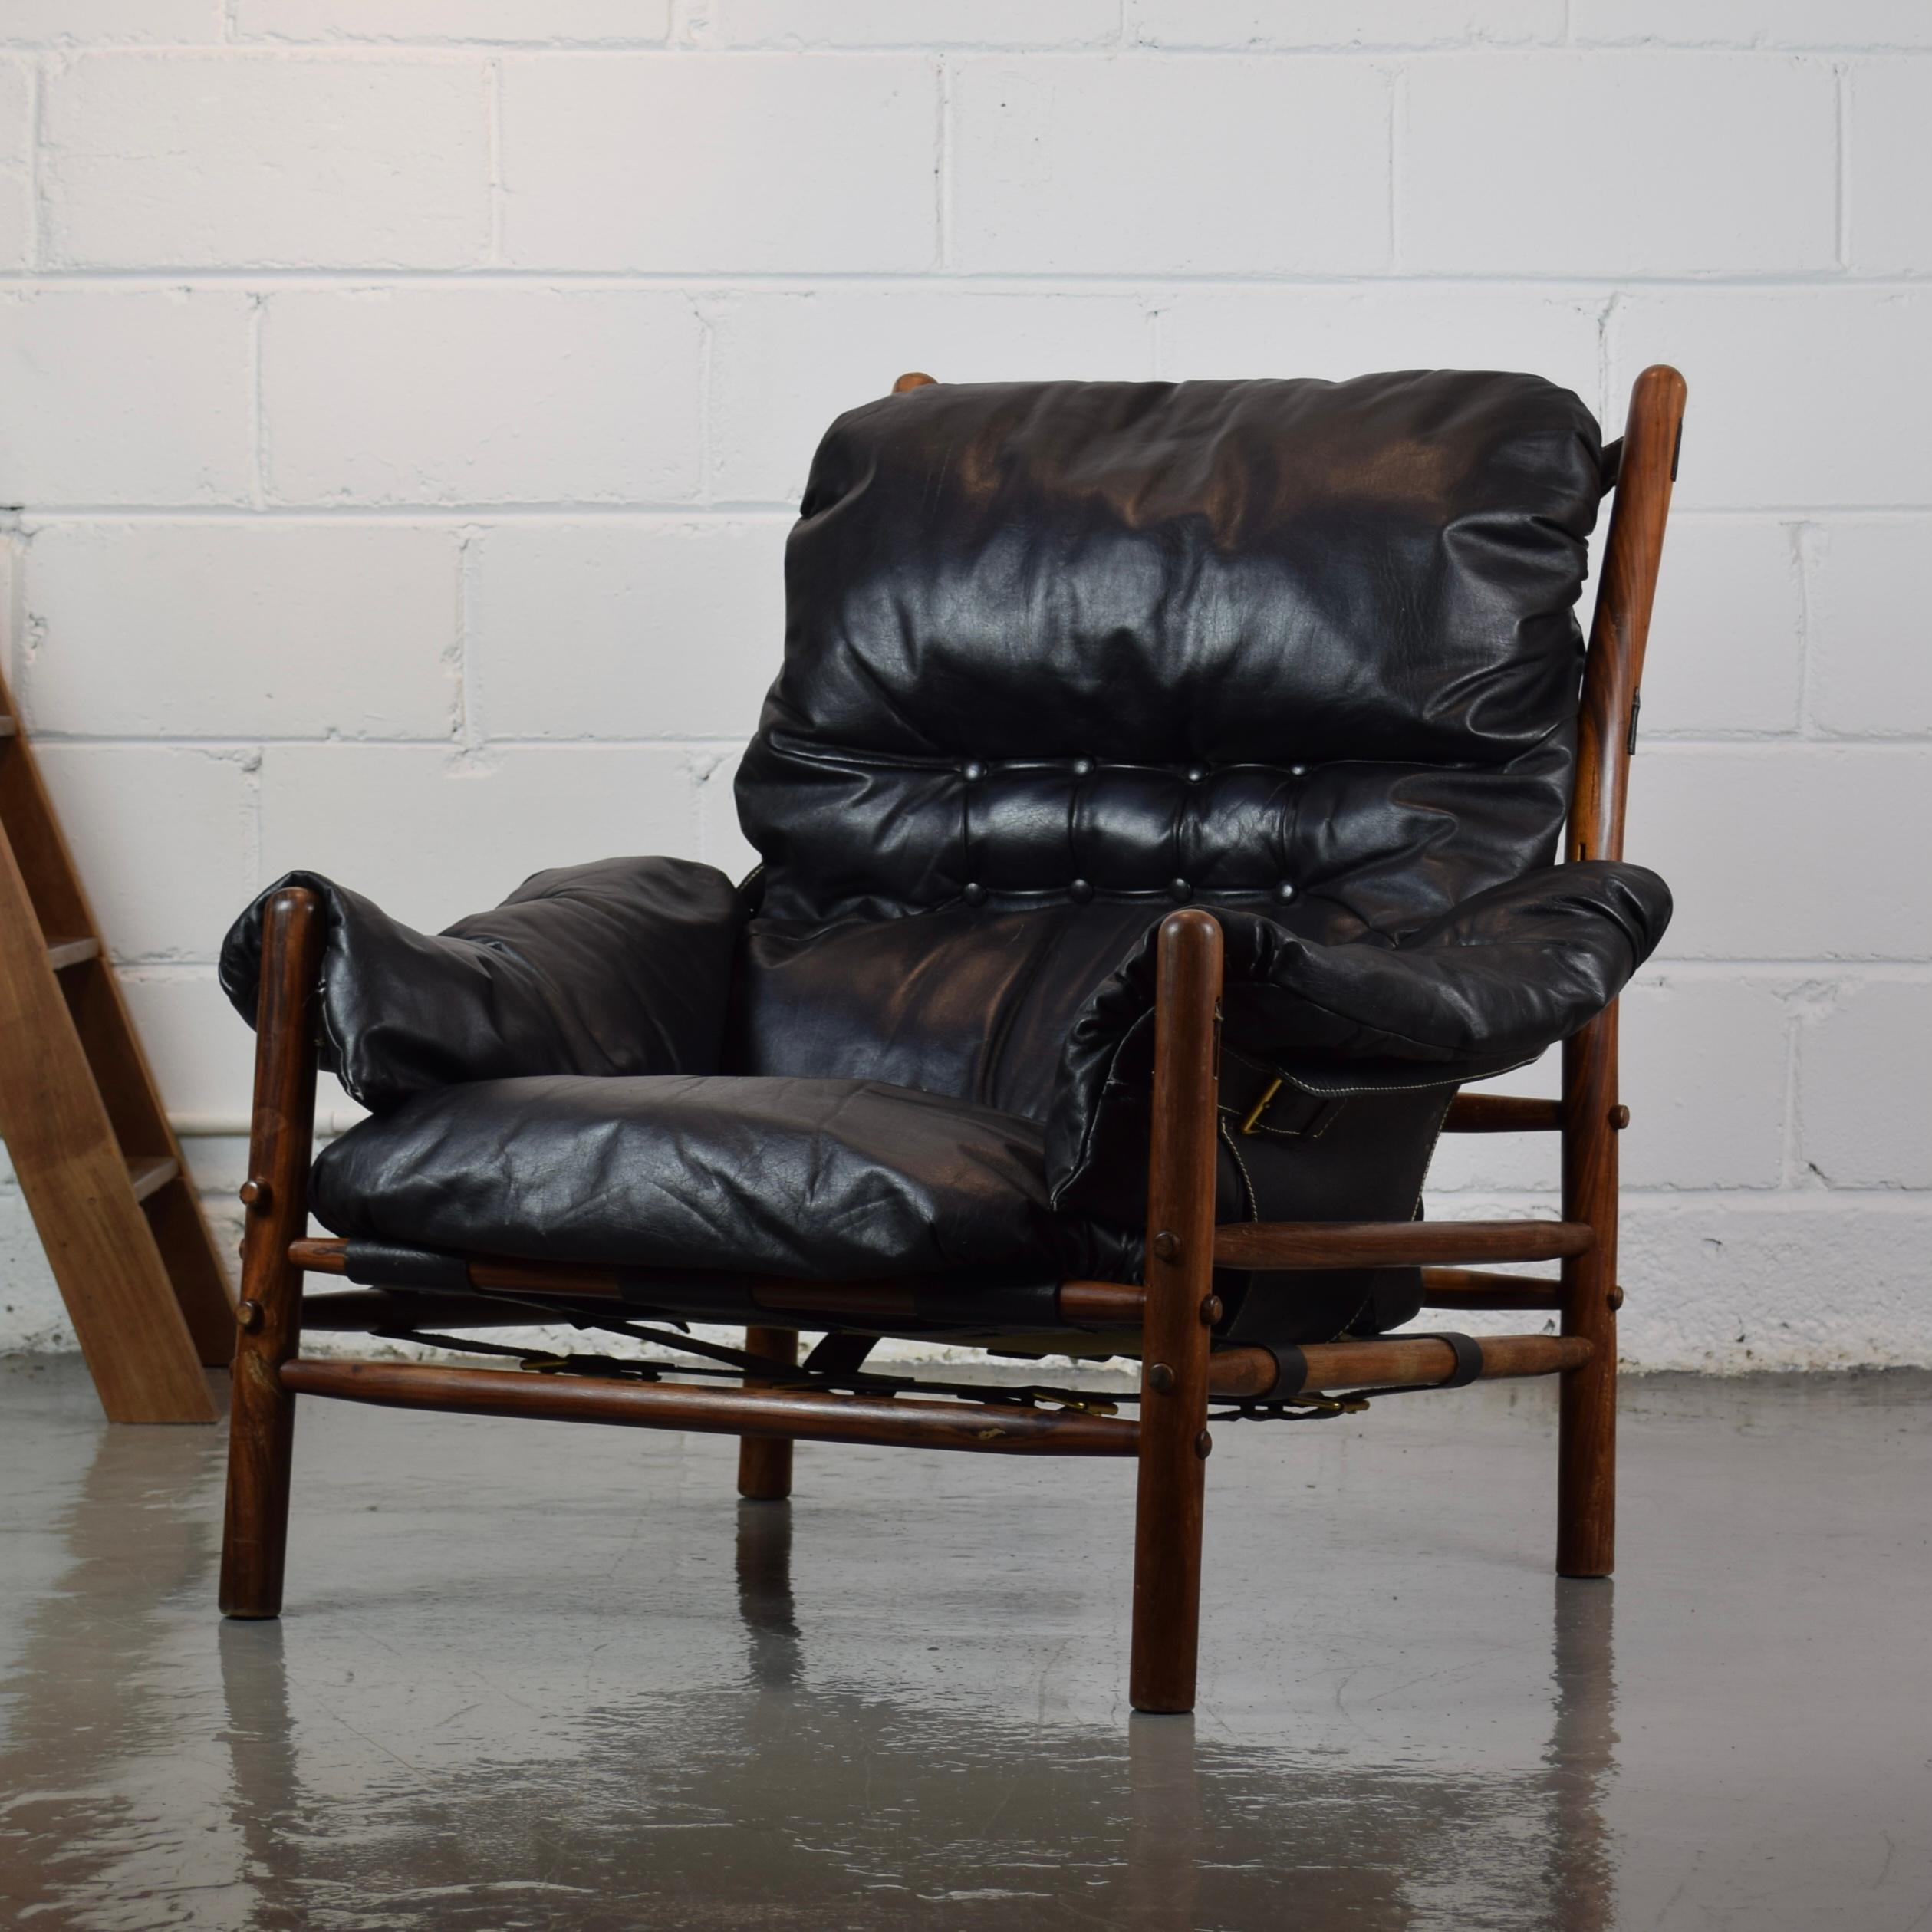 Made of Brazilian rosewood and top grain leather. In excellent condition- two button covers missing. Chair is designed to be held together using the straps as shown. This means it can be flat-packed and shipped for considerably less.

Very